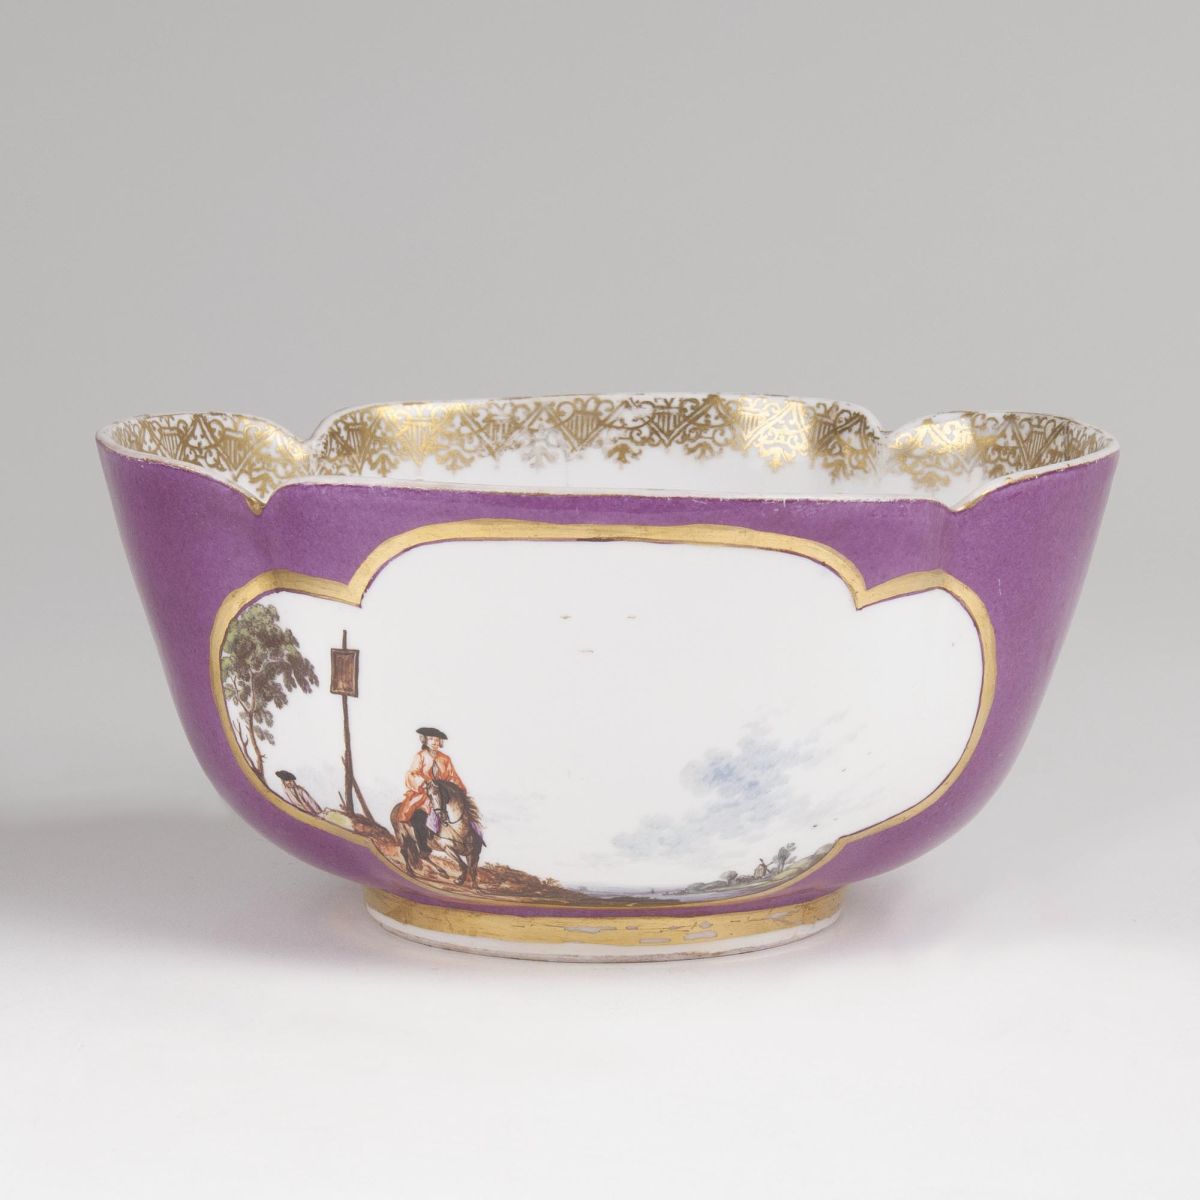 A Bowl with Crimson Ground and Landscapes